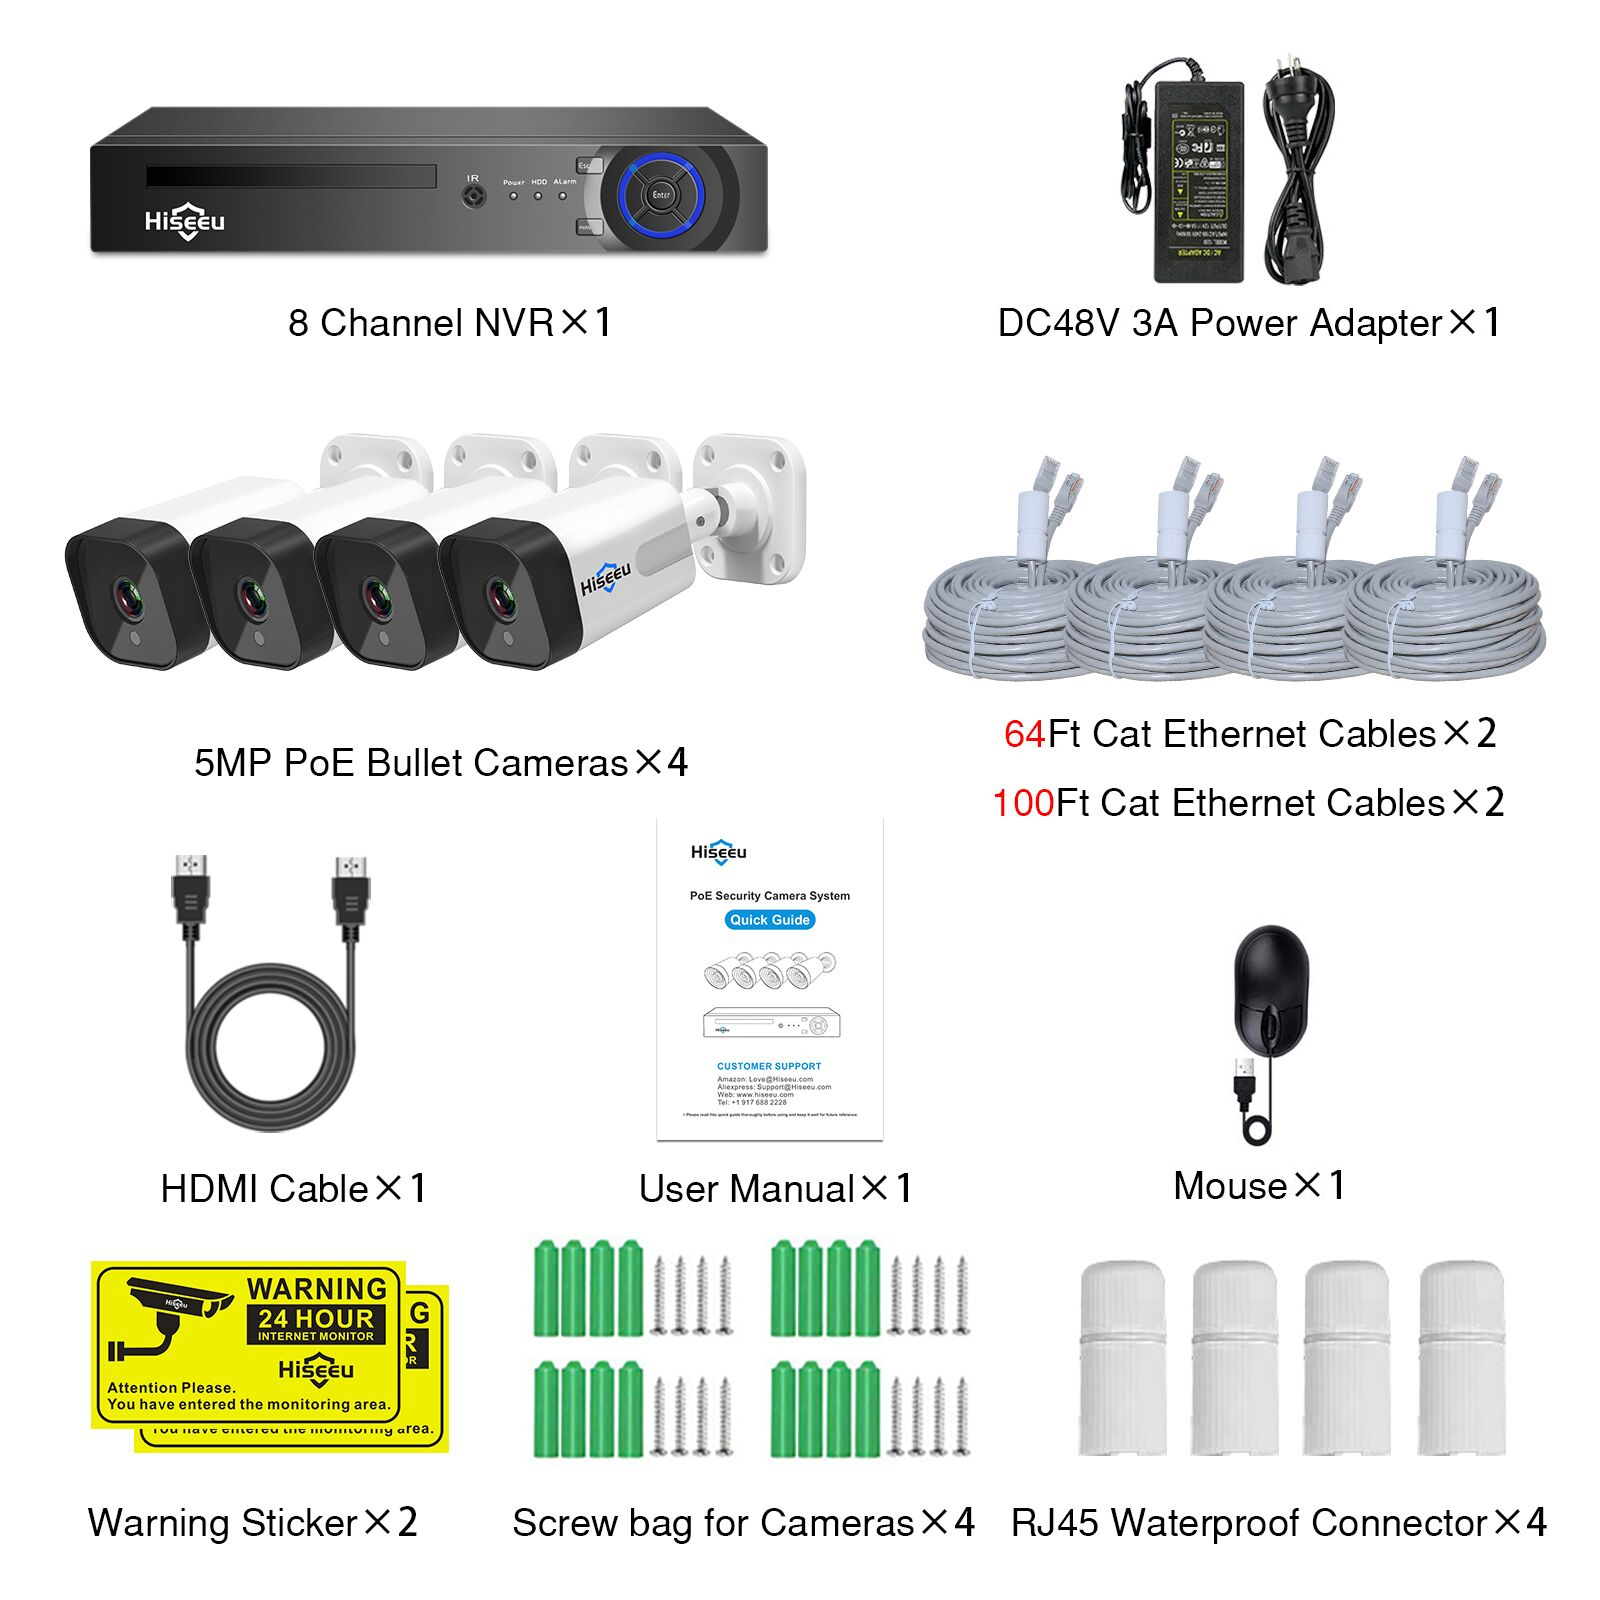 Hiseeu-4Pcs-POE-H265-Security-IP-Cameras-8CH-5MP-NVR-Camera-System-Support-Audio-Night-Vision-10m--I-1580228-18